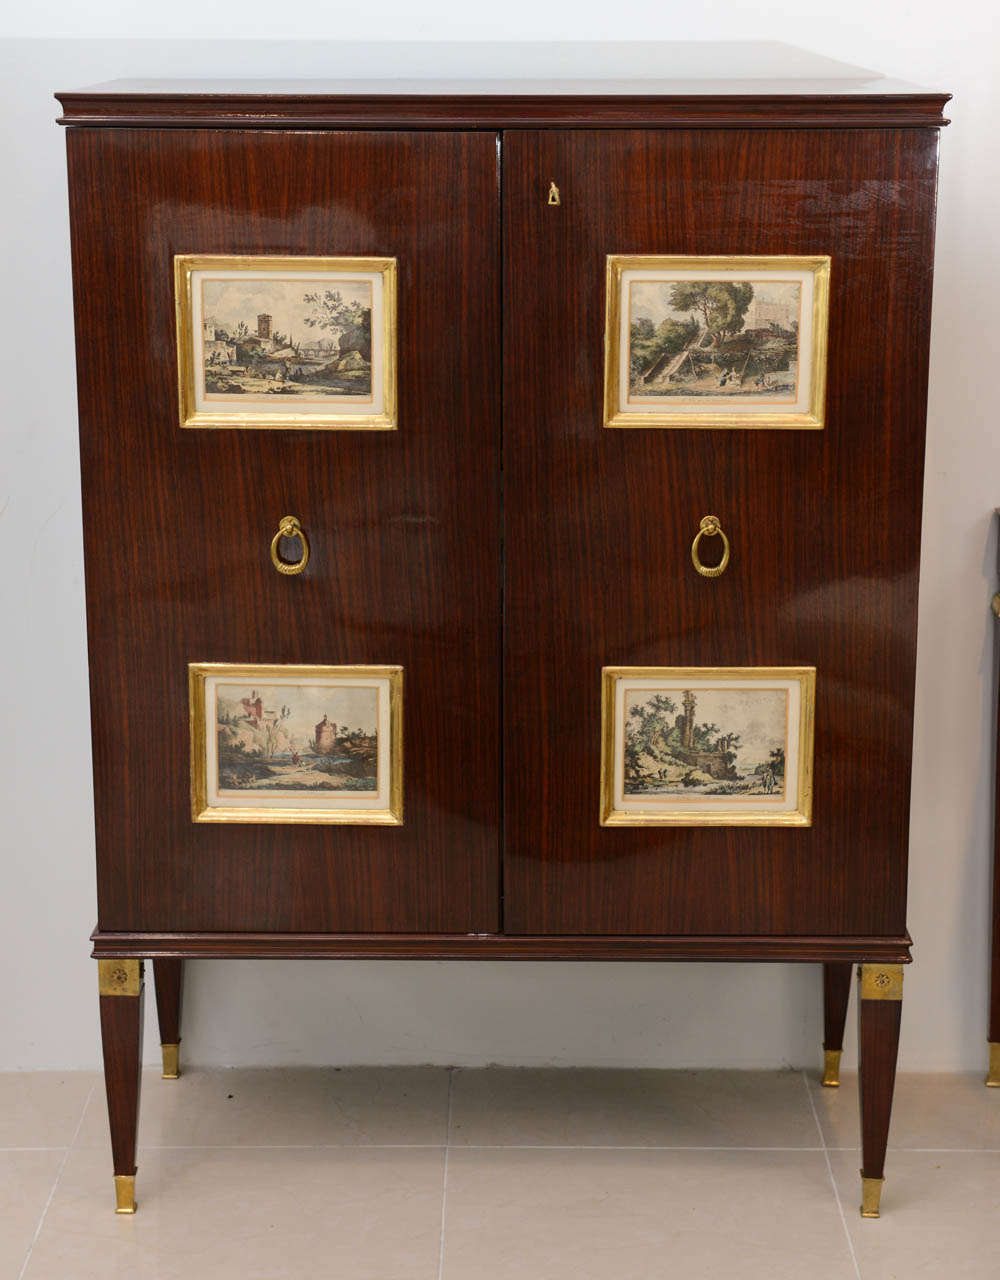 The rectangular top over two doors with giltwood panels inset with 18th century engravings of classical scenes, on square tapering legs headed with gilt bronze mounts with star motif, terminating in sabots, the interior finely fitted with drawers